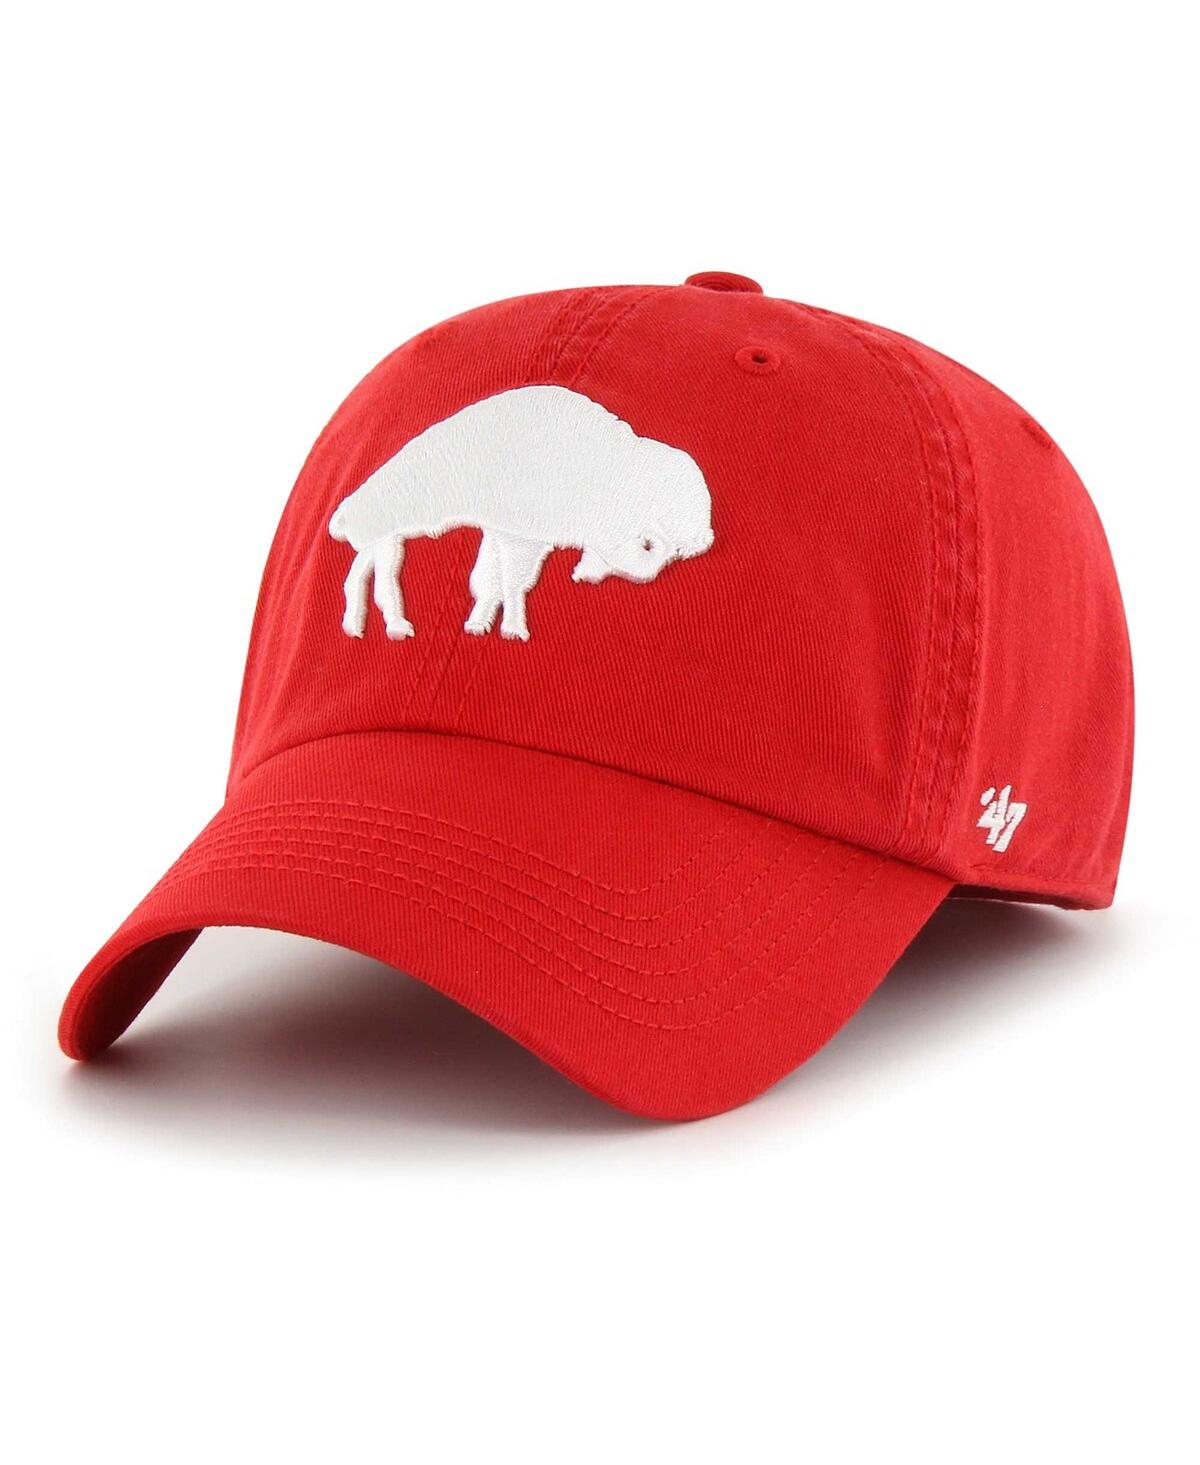 Men's '47 Brand Red Buffalo Bills Gridiron Classics Franchise Legacy Fitted Hat - Red